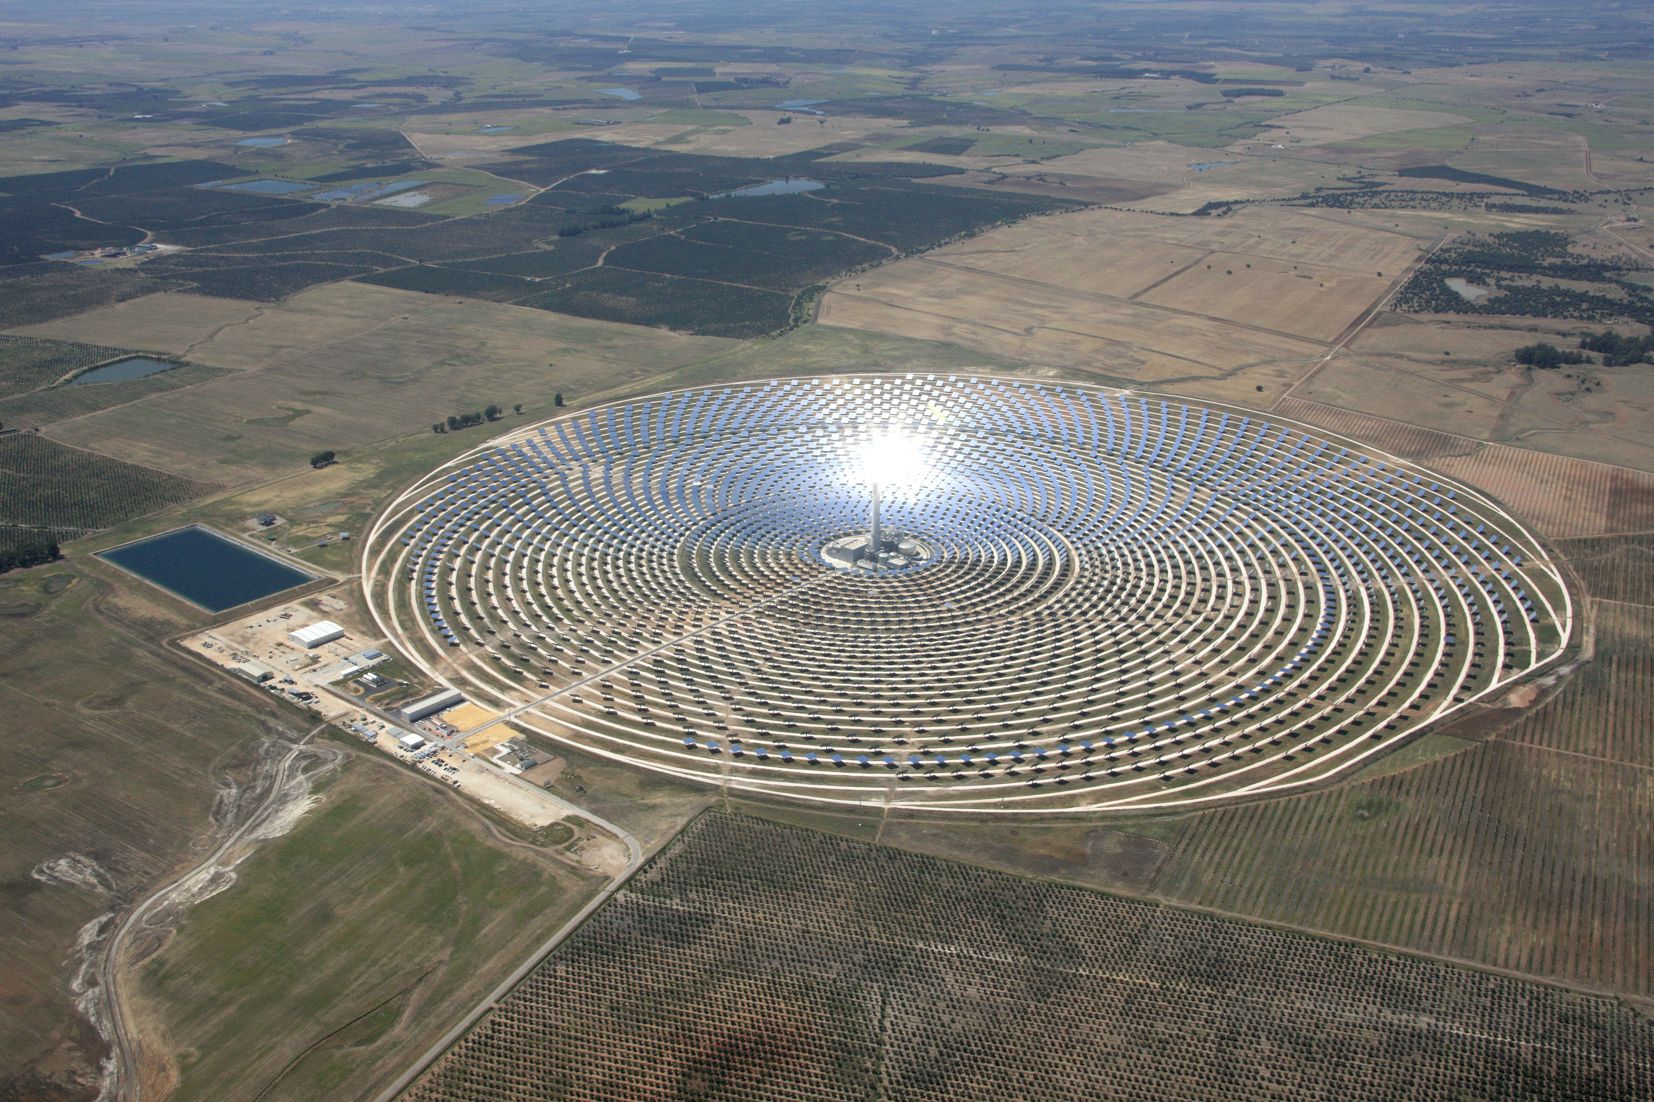 In the “Super Grid” project, Fraunhofer ISE is working on the optimization and integration of thermal storage systems in order to increase the flexibility and efficiency of solar thermal power plants. (The photo shows the Gemasolar solar thermal plant, owned by Torresol Energy, in Spain.) 